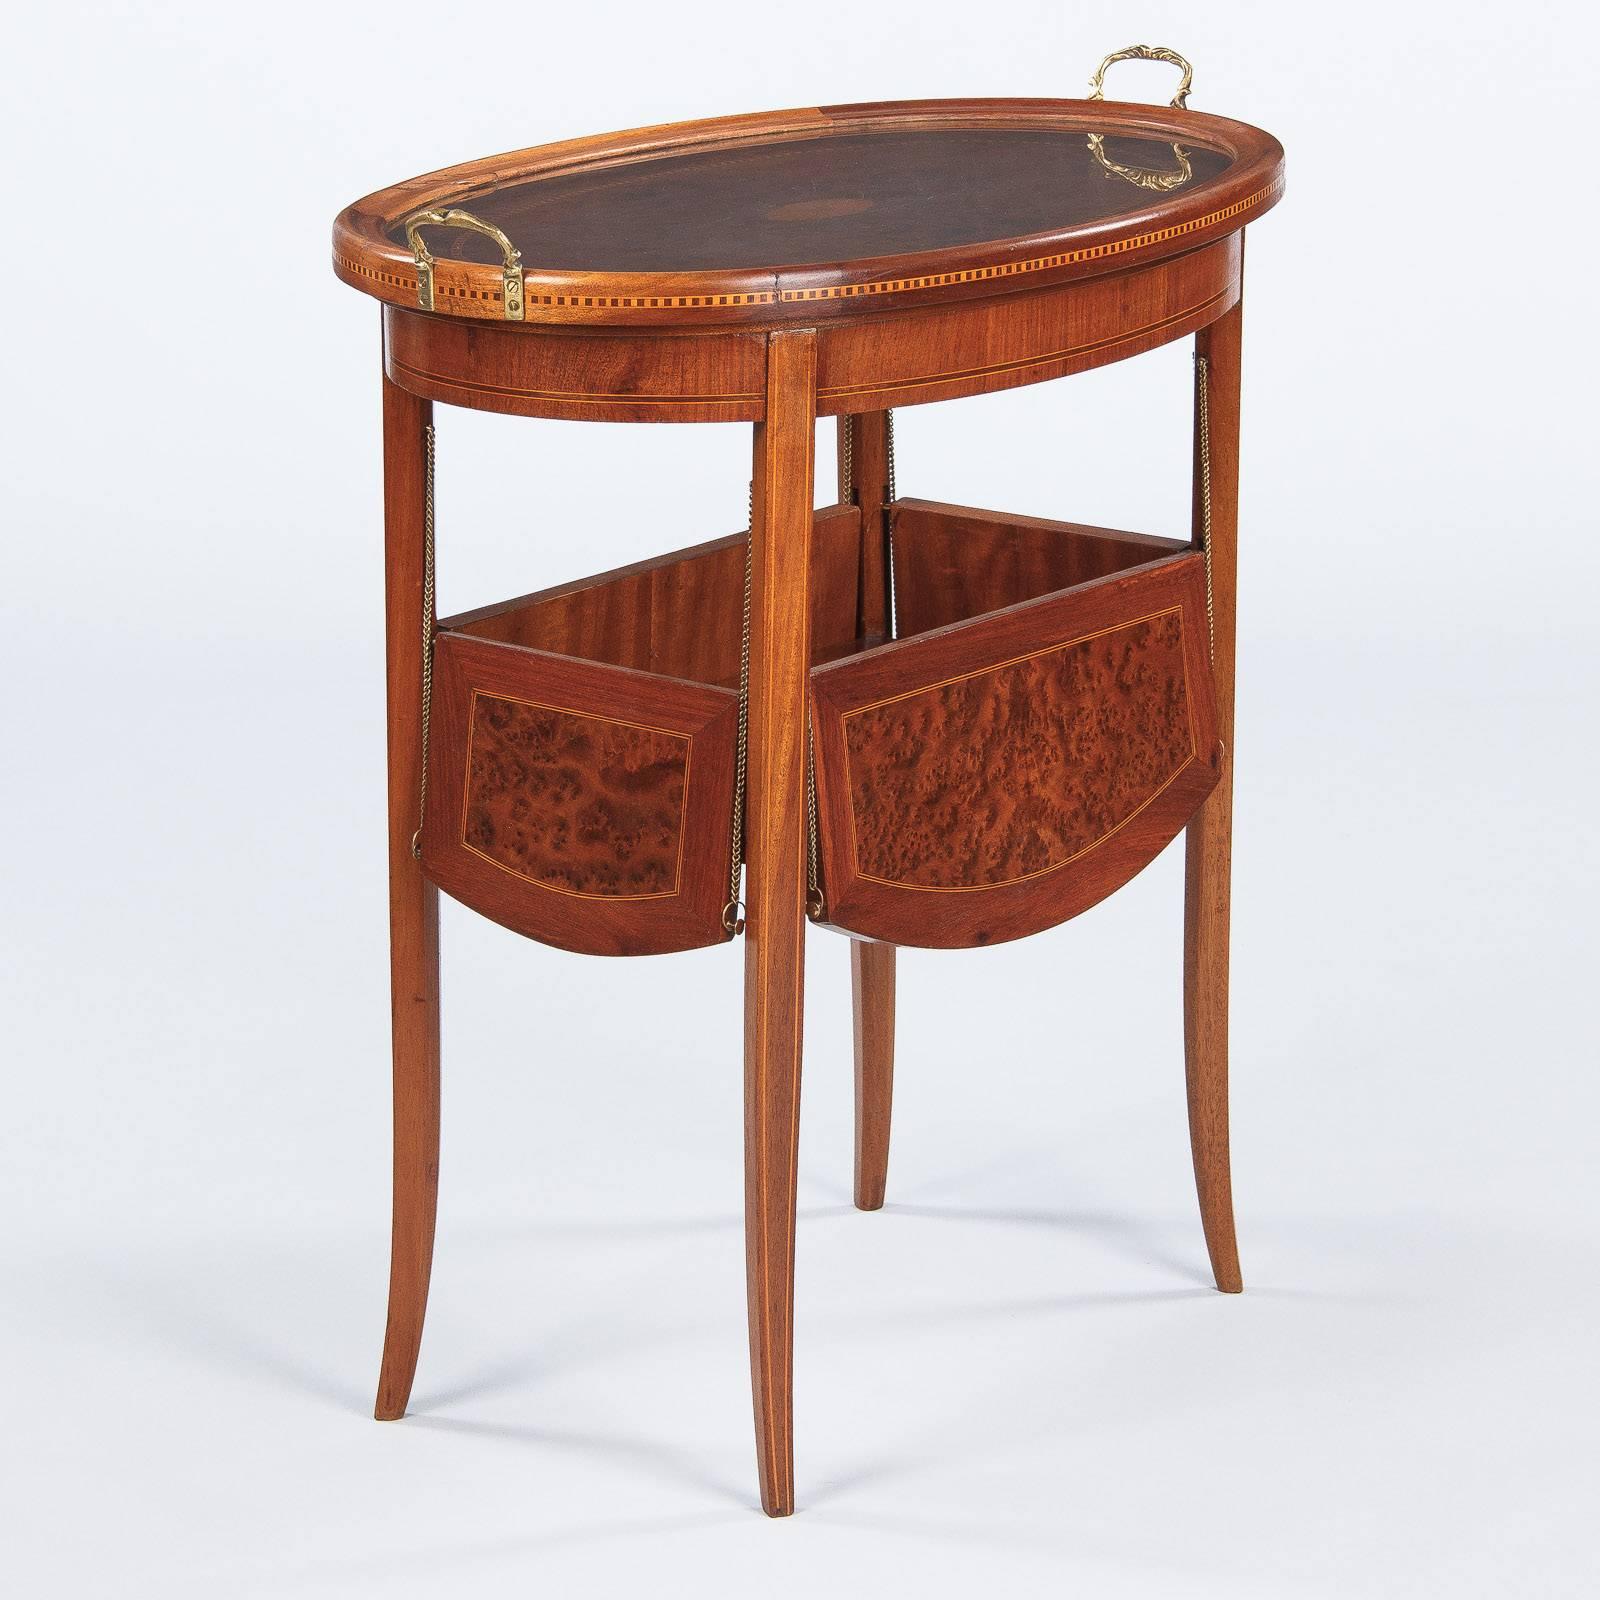 Neoclassical Revival French Neoclassical Cherrywood and Elm Serving Table, 1900s